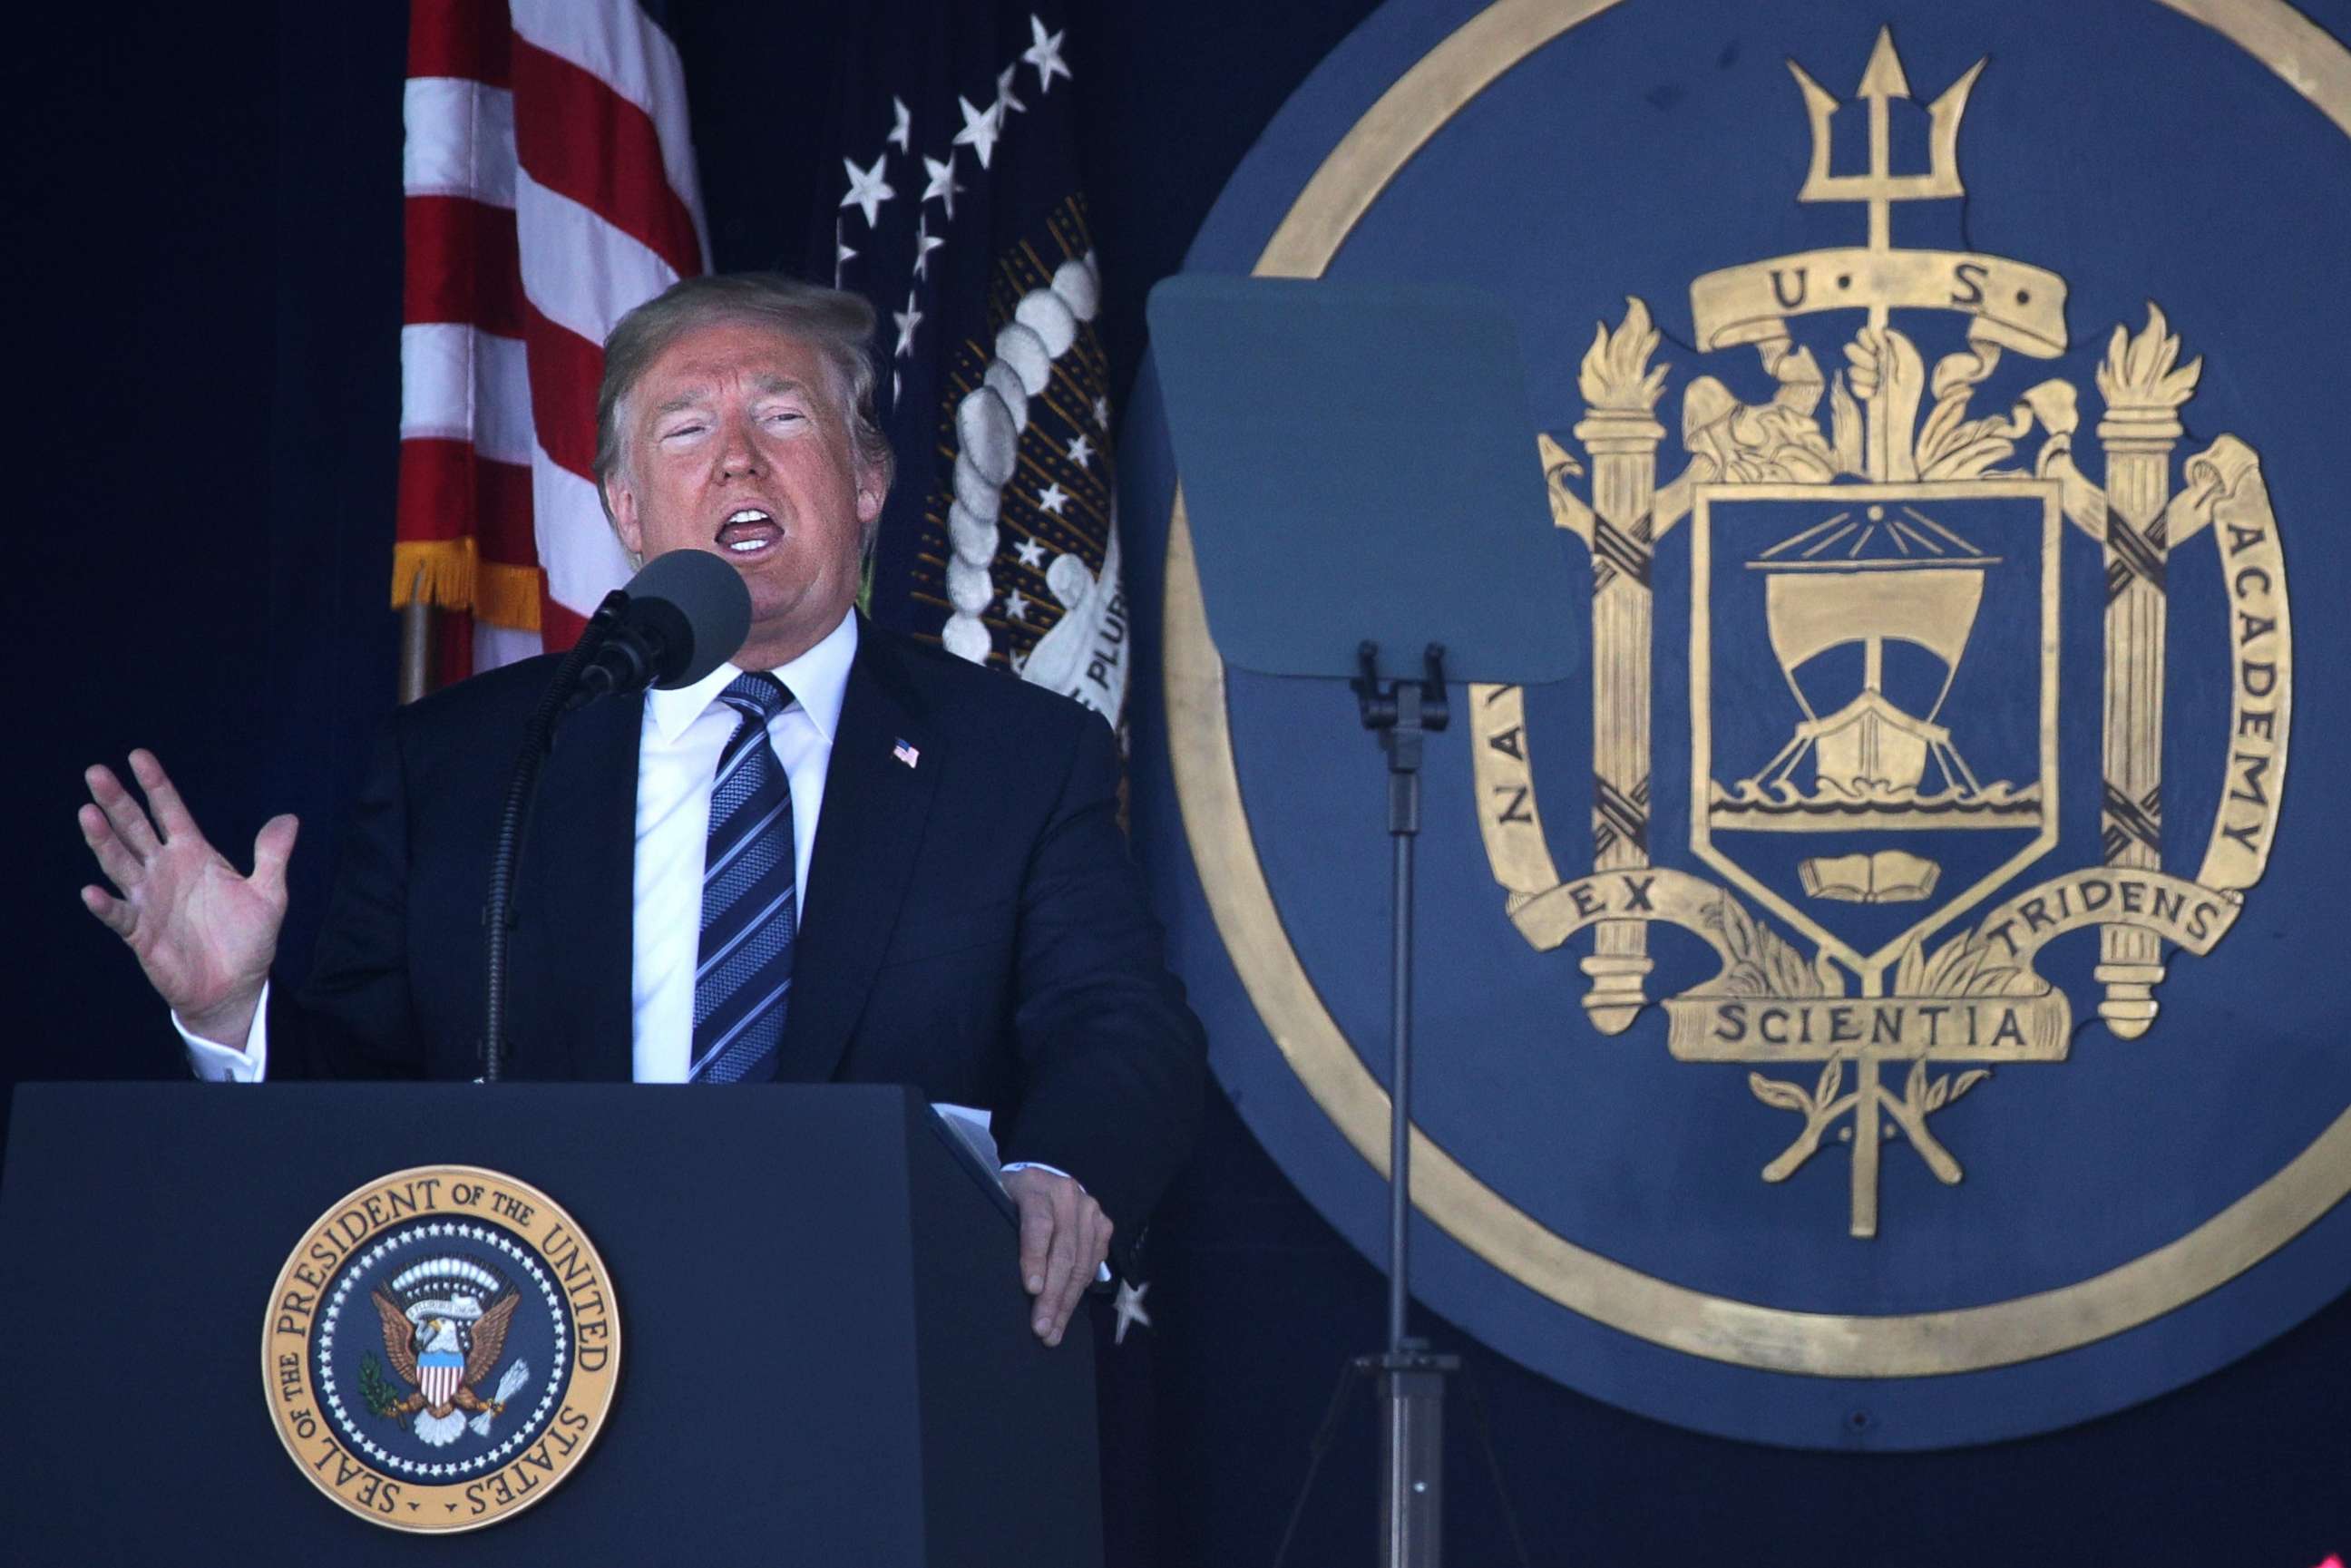 PHOTO: President Donald Trump addresses a U.S. Naval Academy graduation ceremony at the Navy-Marine Corps Memorial Stadium, May 25, 2018 in Annapolis, Md.